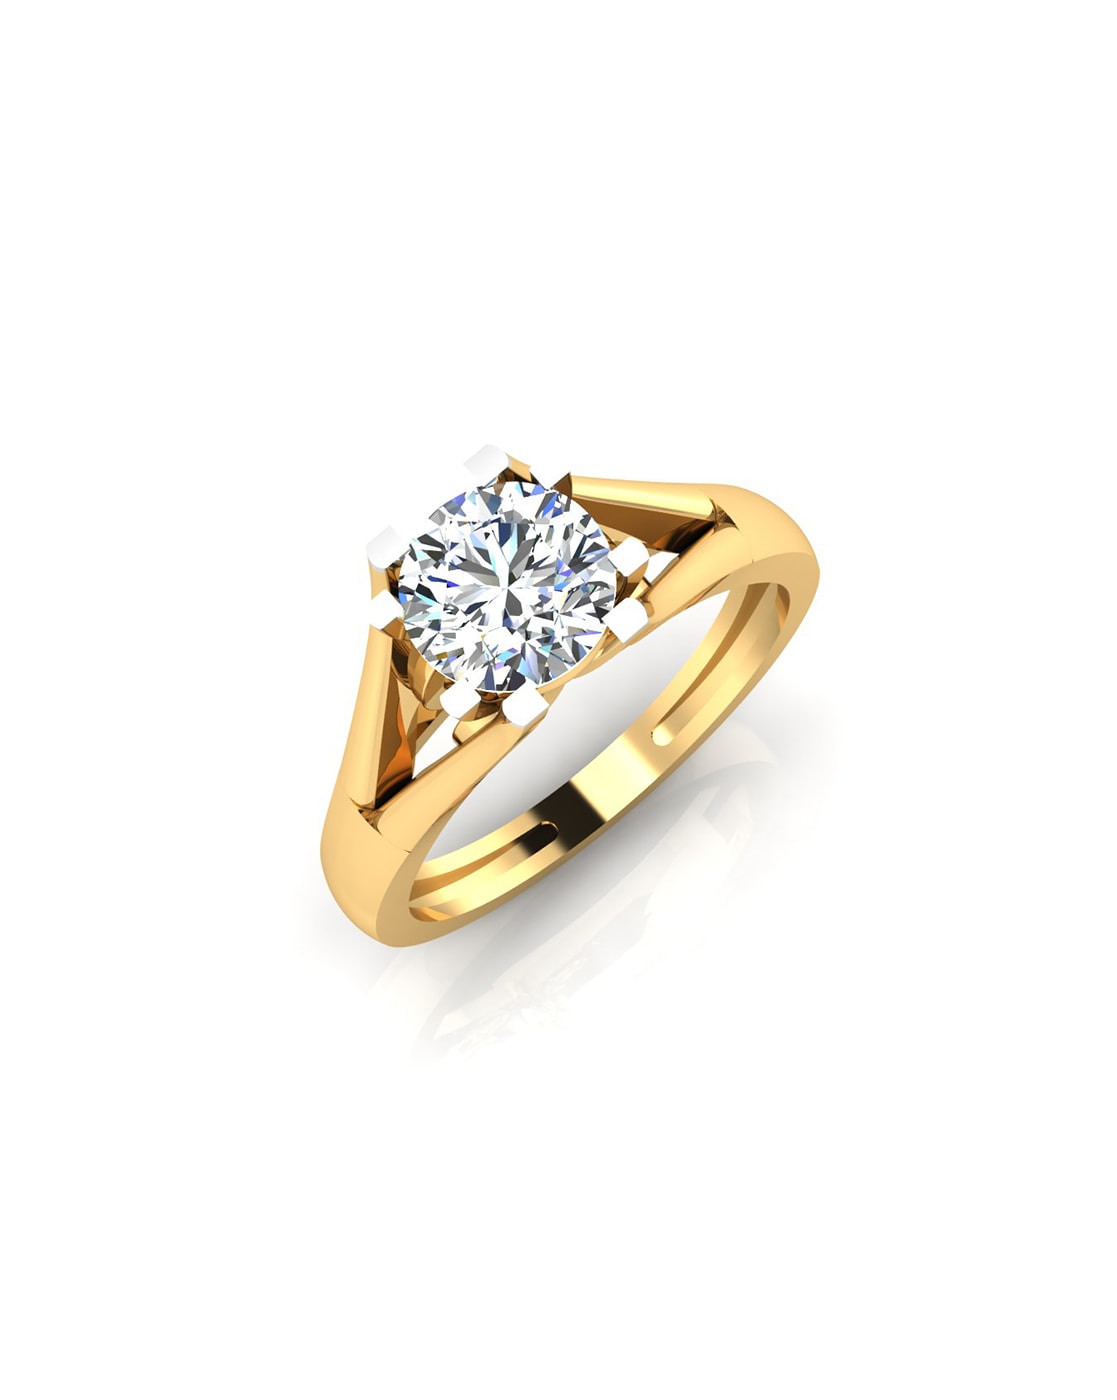 American Dimond (AD) Ring For Women by Niscka-Silver Ring Design